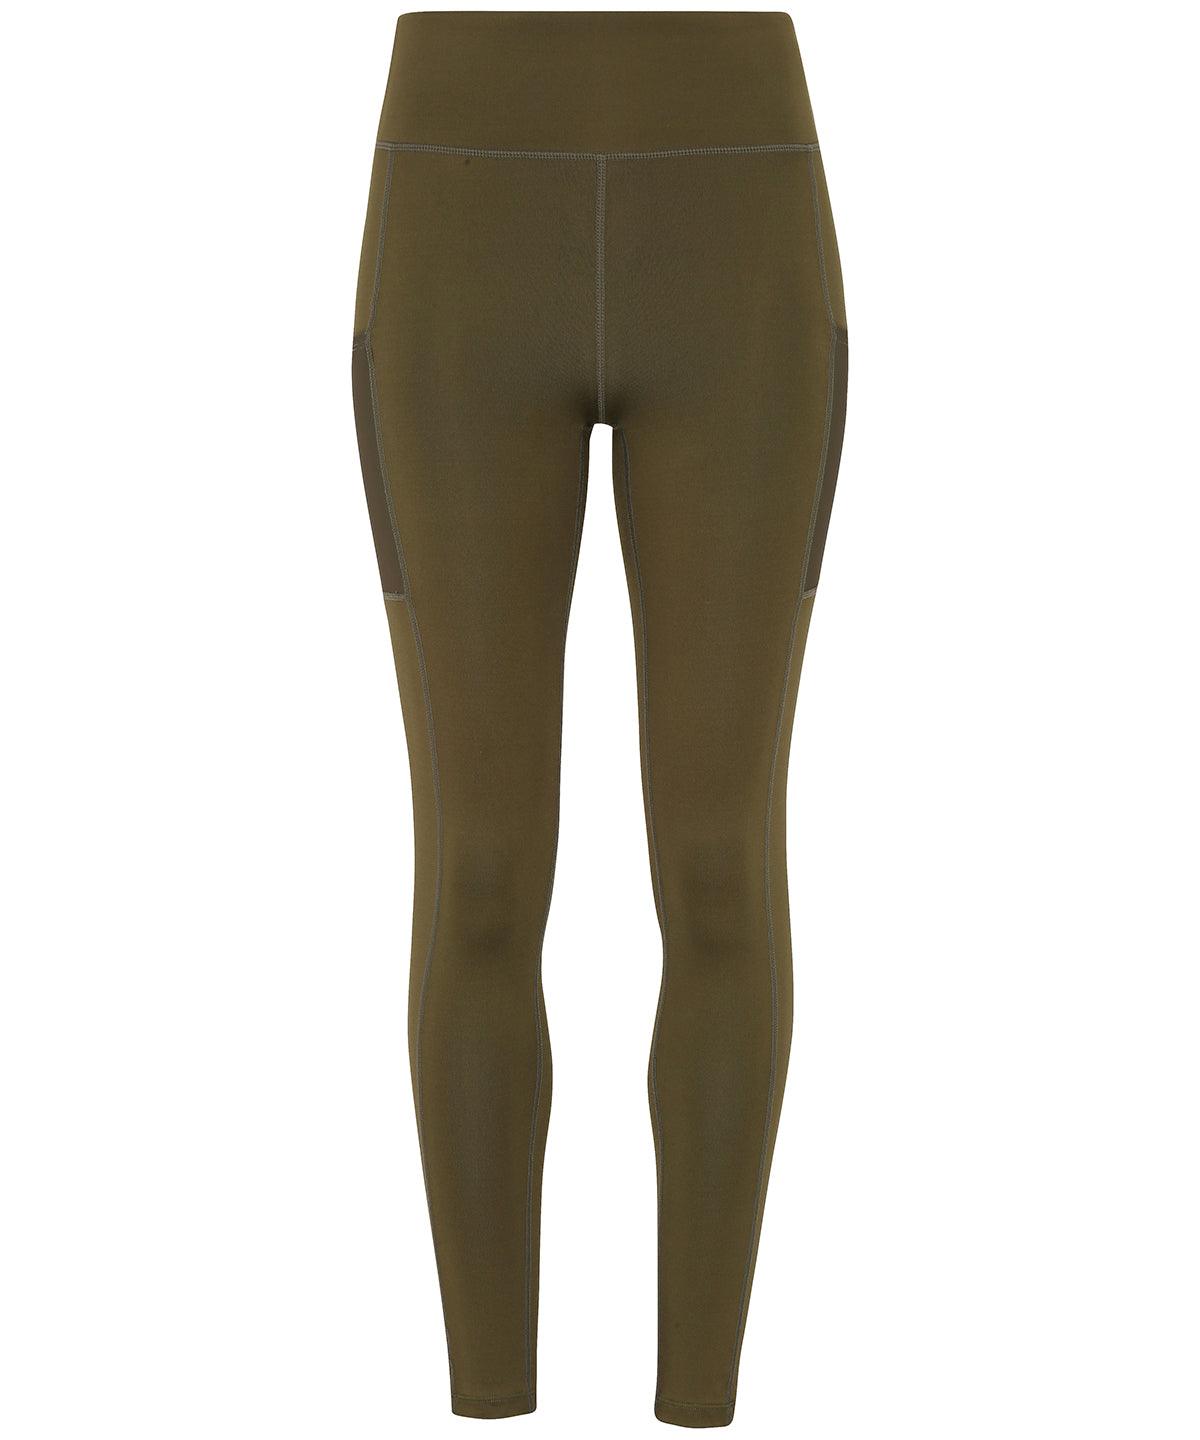 Olive - Women's TriDri® performance compression leggings Leggings TriDri® Athleisurewear, Back to Fitness, Exclusives, Fashion Leggings, Leggings, Must Haves, On-Trend Activewear, Rebrandable, Sports & Leisure, Trousers & Shorts Schoolwear Centres